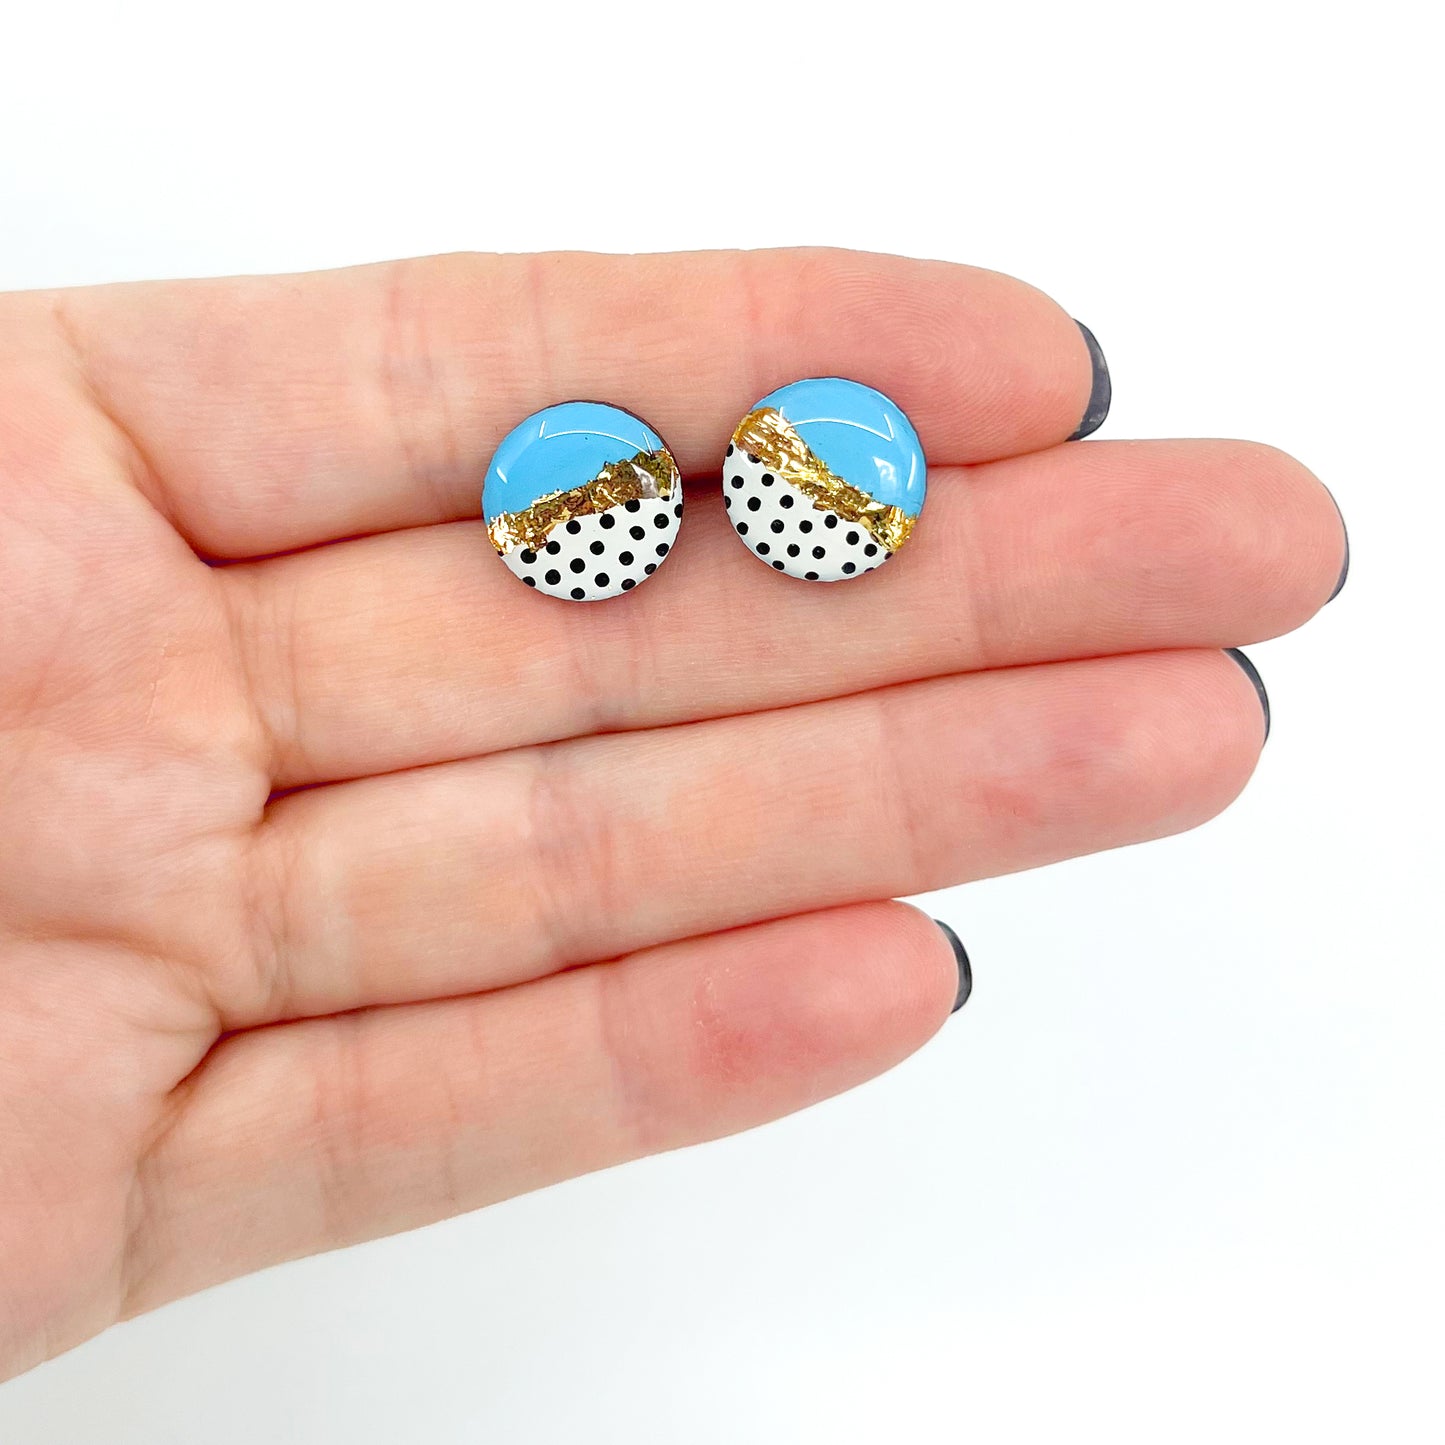 Dots - Hand Painted - Blue Spotties